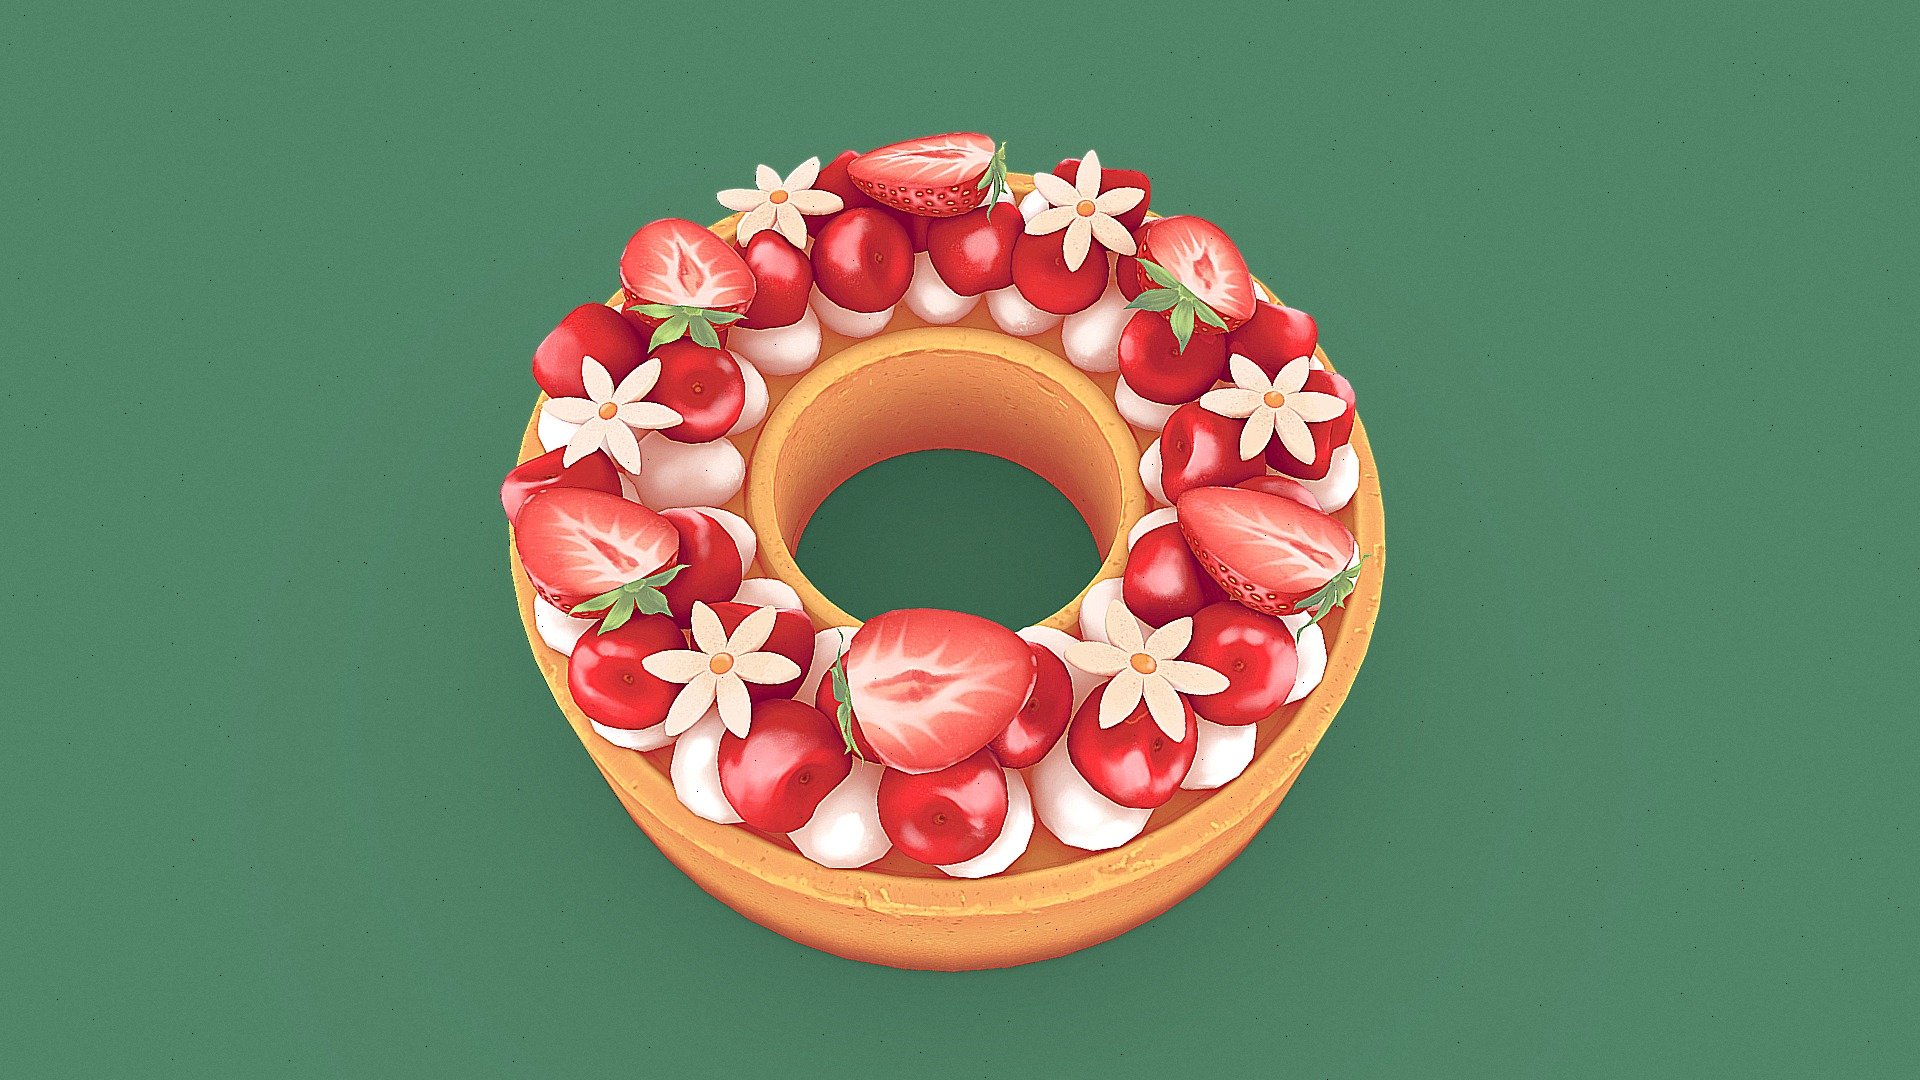 Wreath Tart ! 🍒

Made with Blender, handpainted in Substance Painter ~

Based on the photo of Yuri_Diary03 - Wreath Tart ~ - 3D model by DetectivePacha 3d model